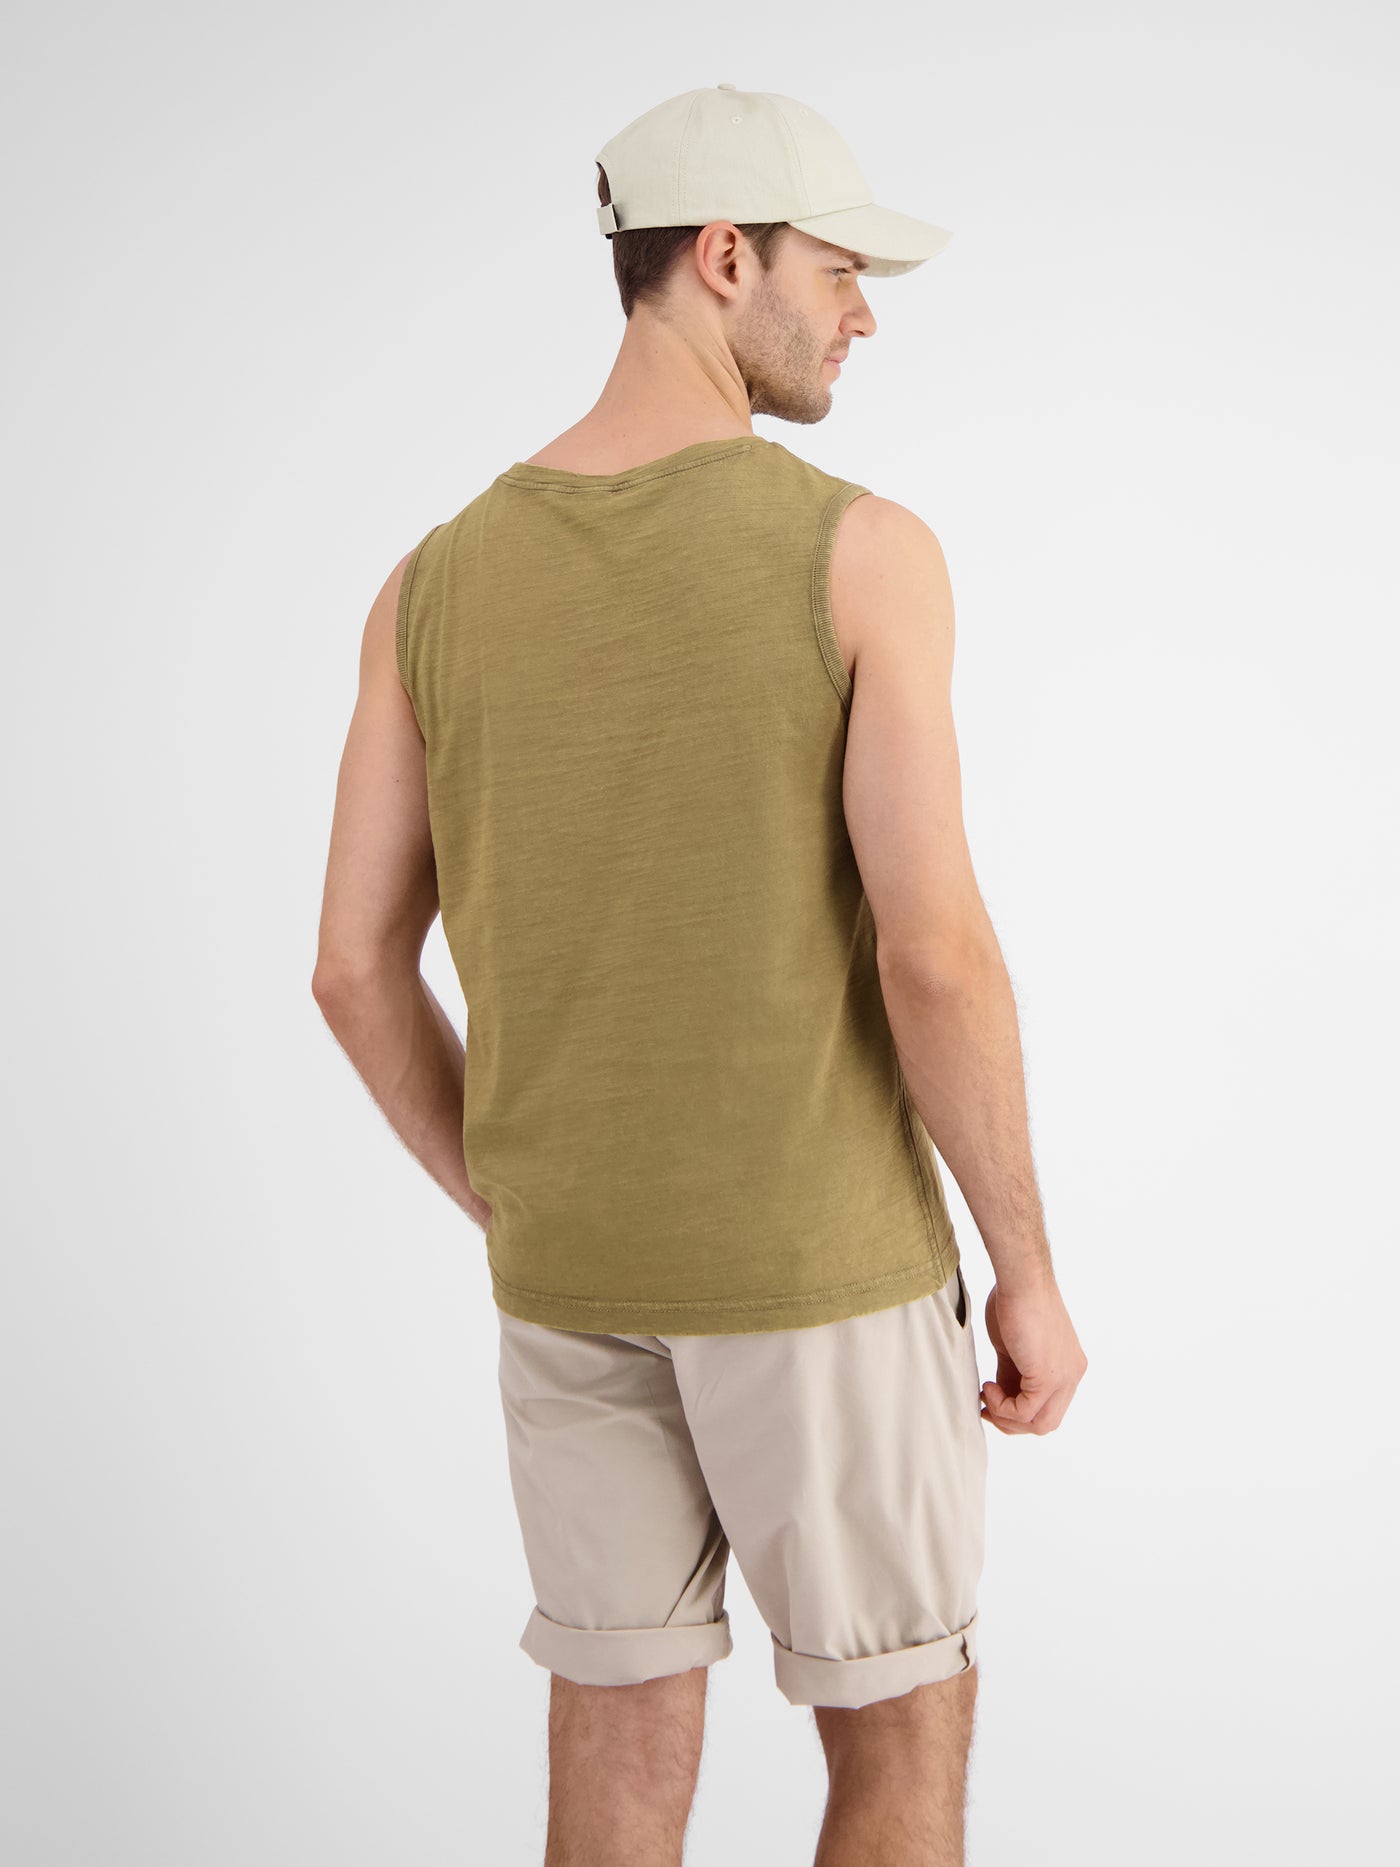 Comfortable tank top with chest pocket